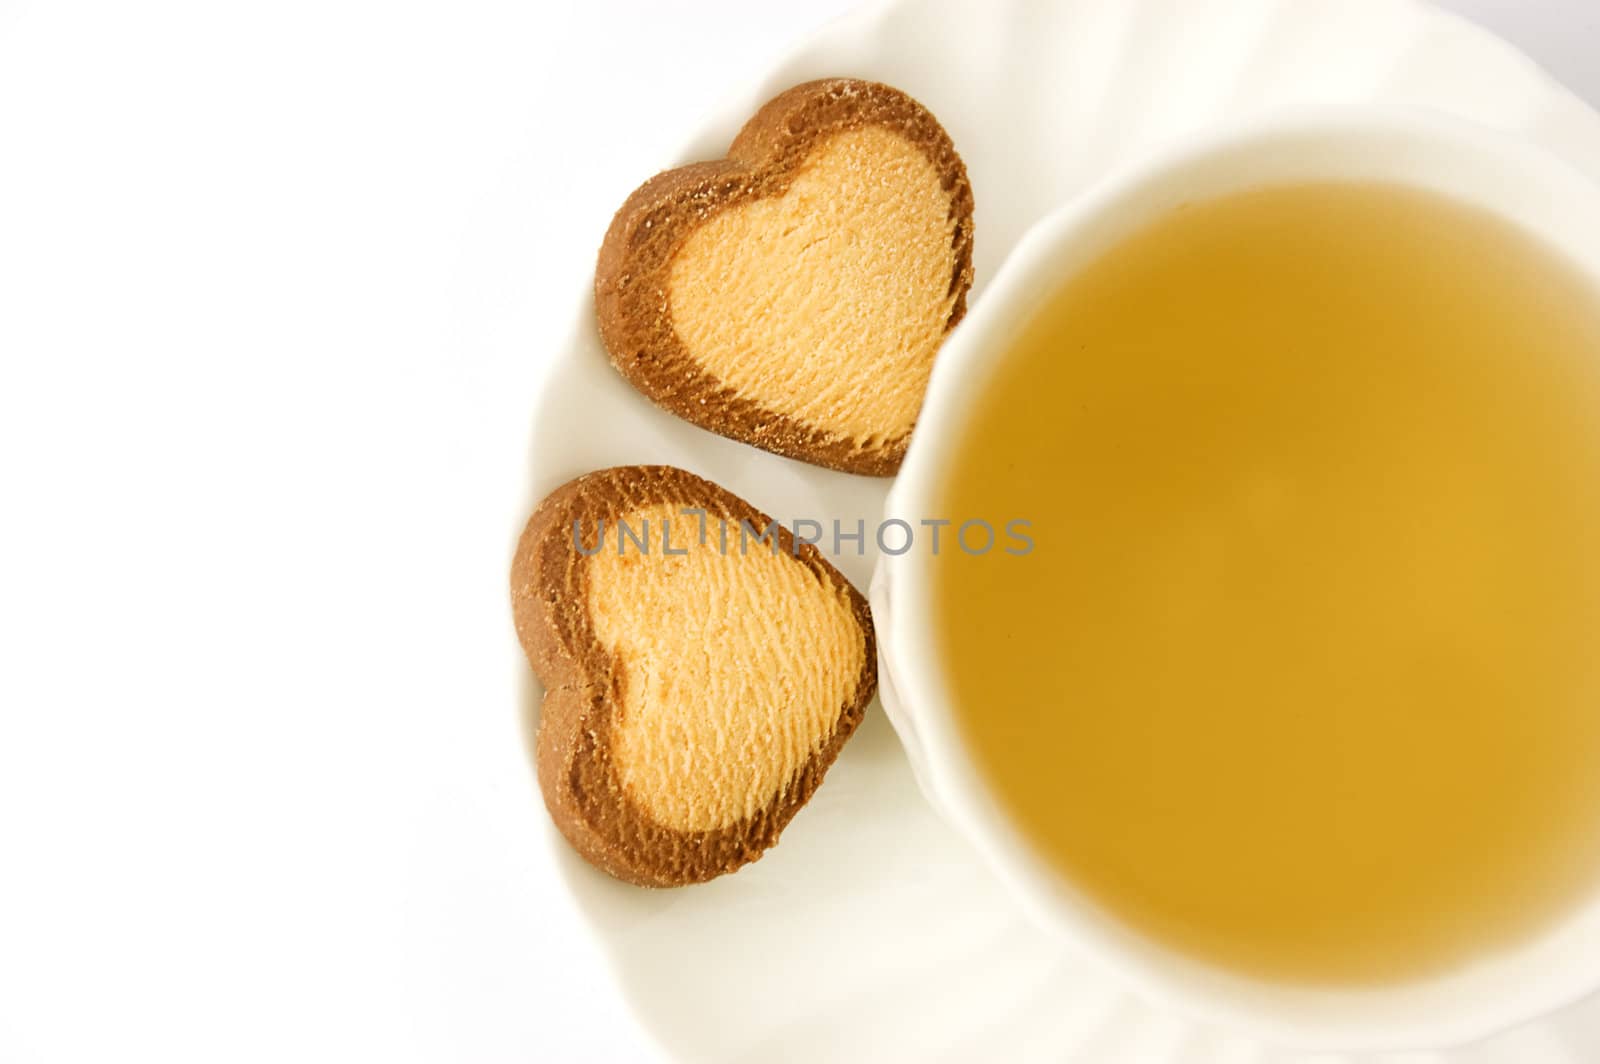 Green tea and heart shaped biscuits by Angel_a